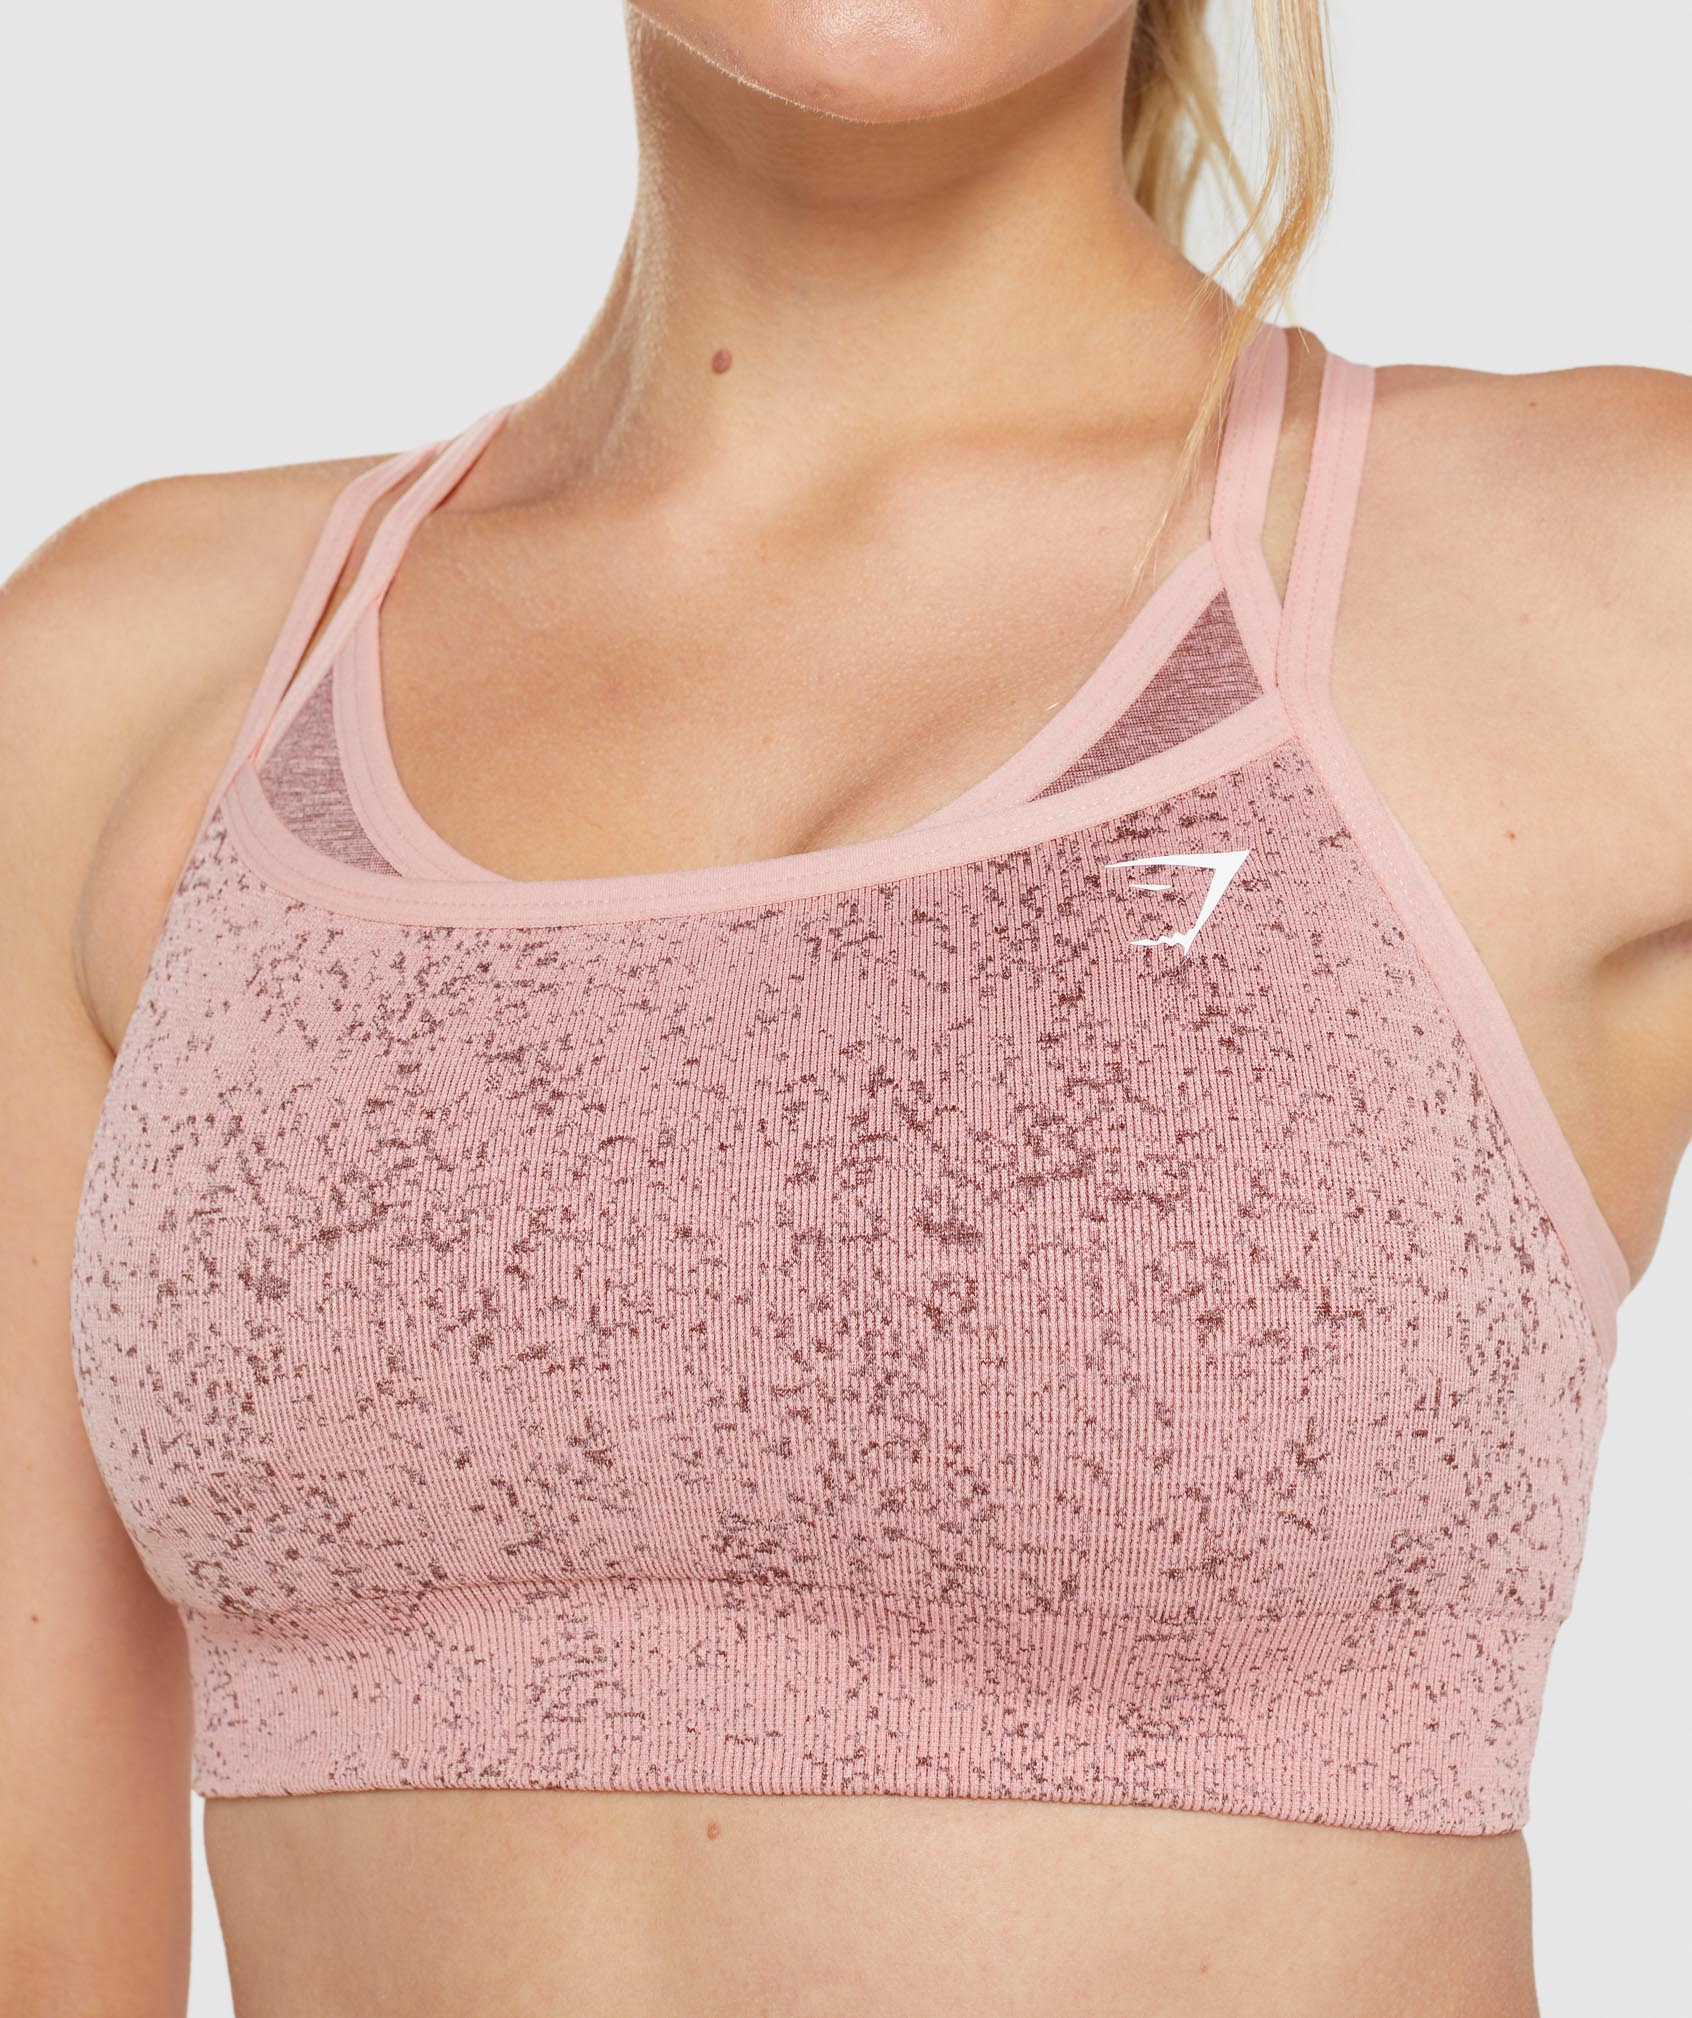 Zella Body Fusion Sports Bra, Coral Is the Pantone Colour For 2019, So  Here's a Bunch of Cute Coral Fitness Gear You Need